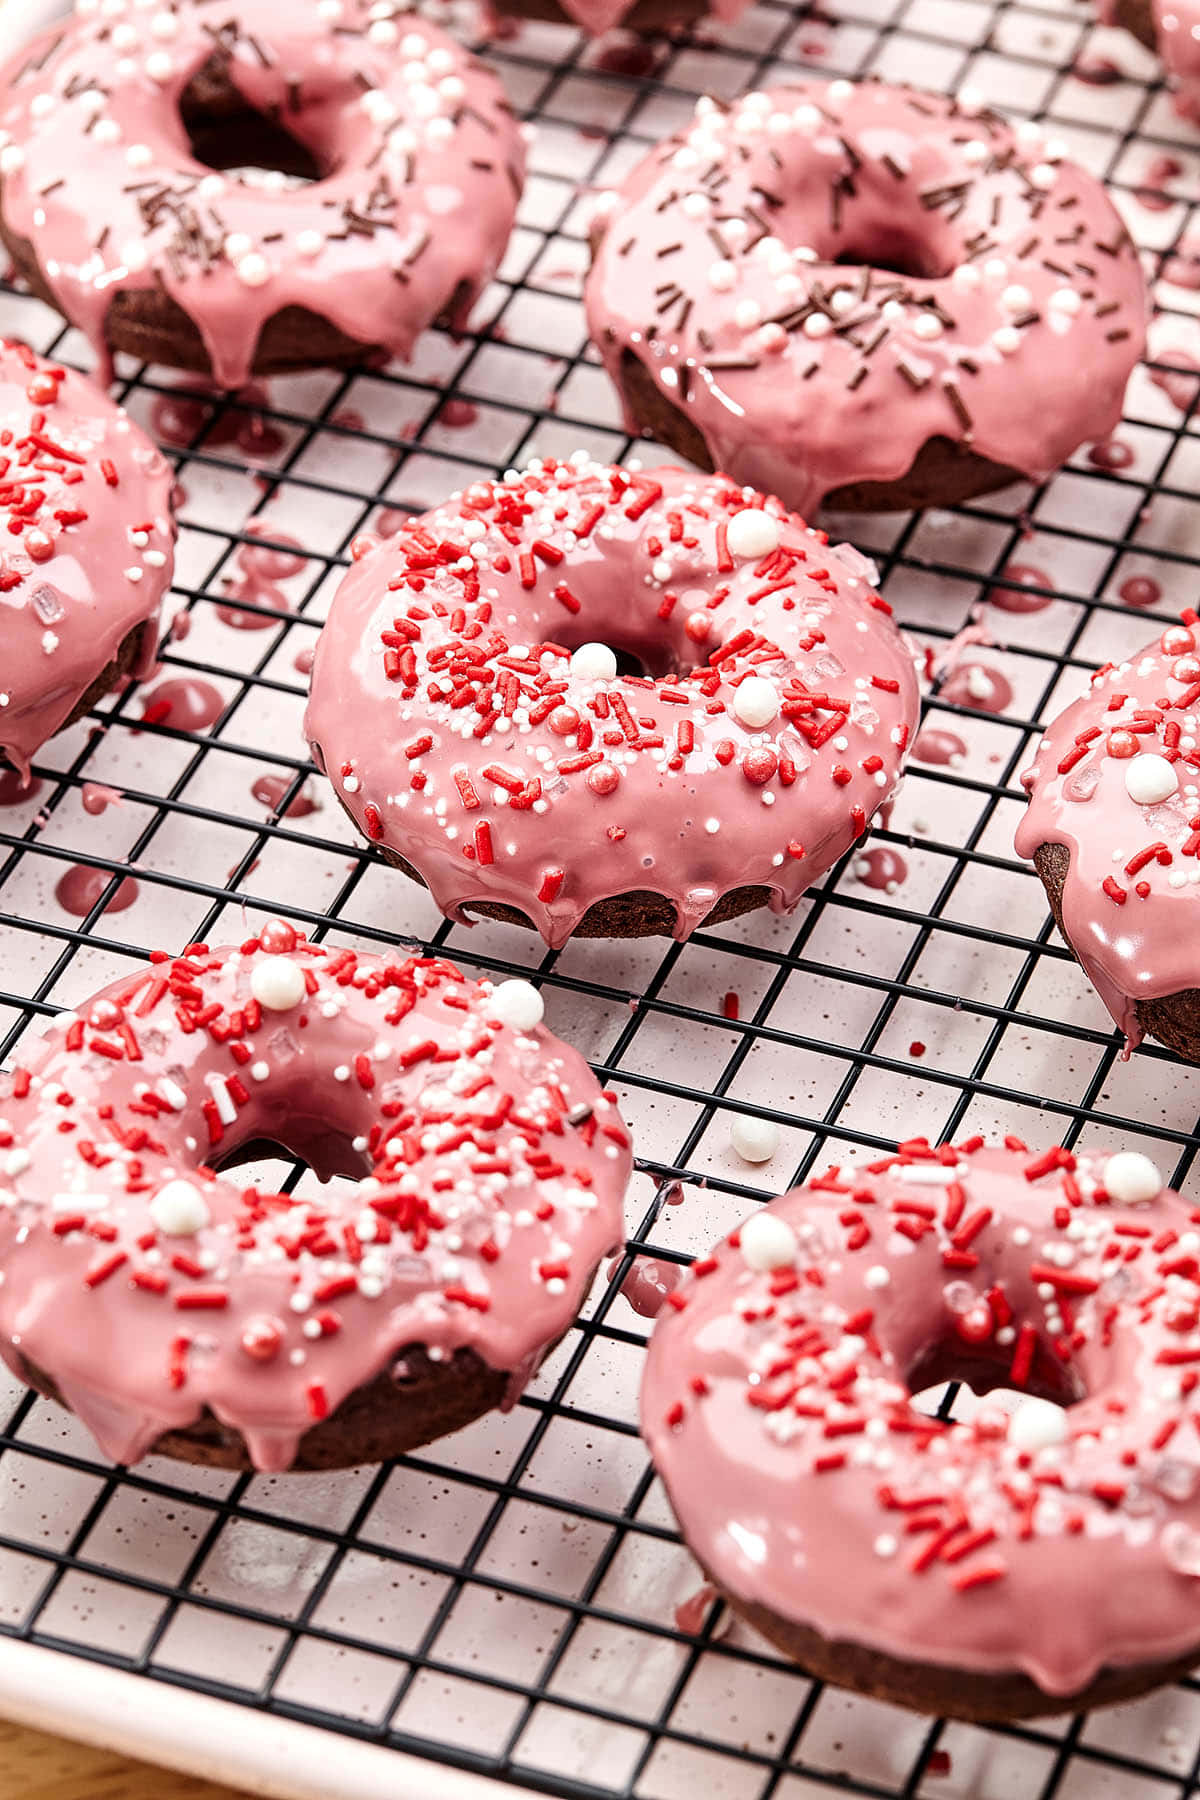 Delicious Glazed Donut Perfectly Coated in Sweet Icing Wallpaper